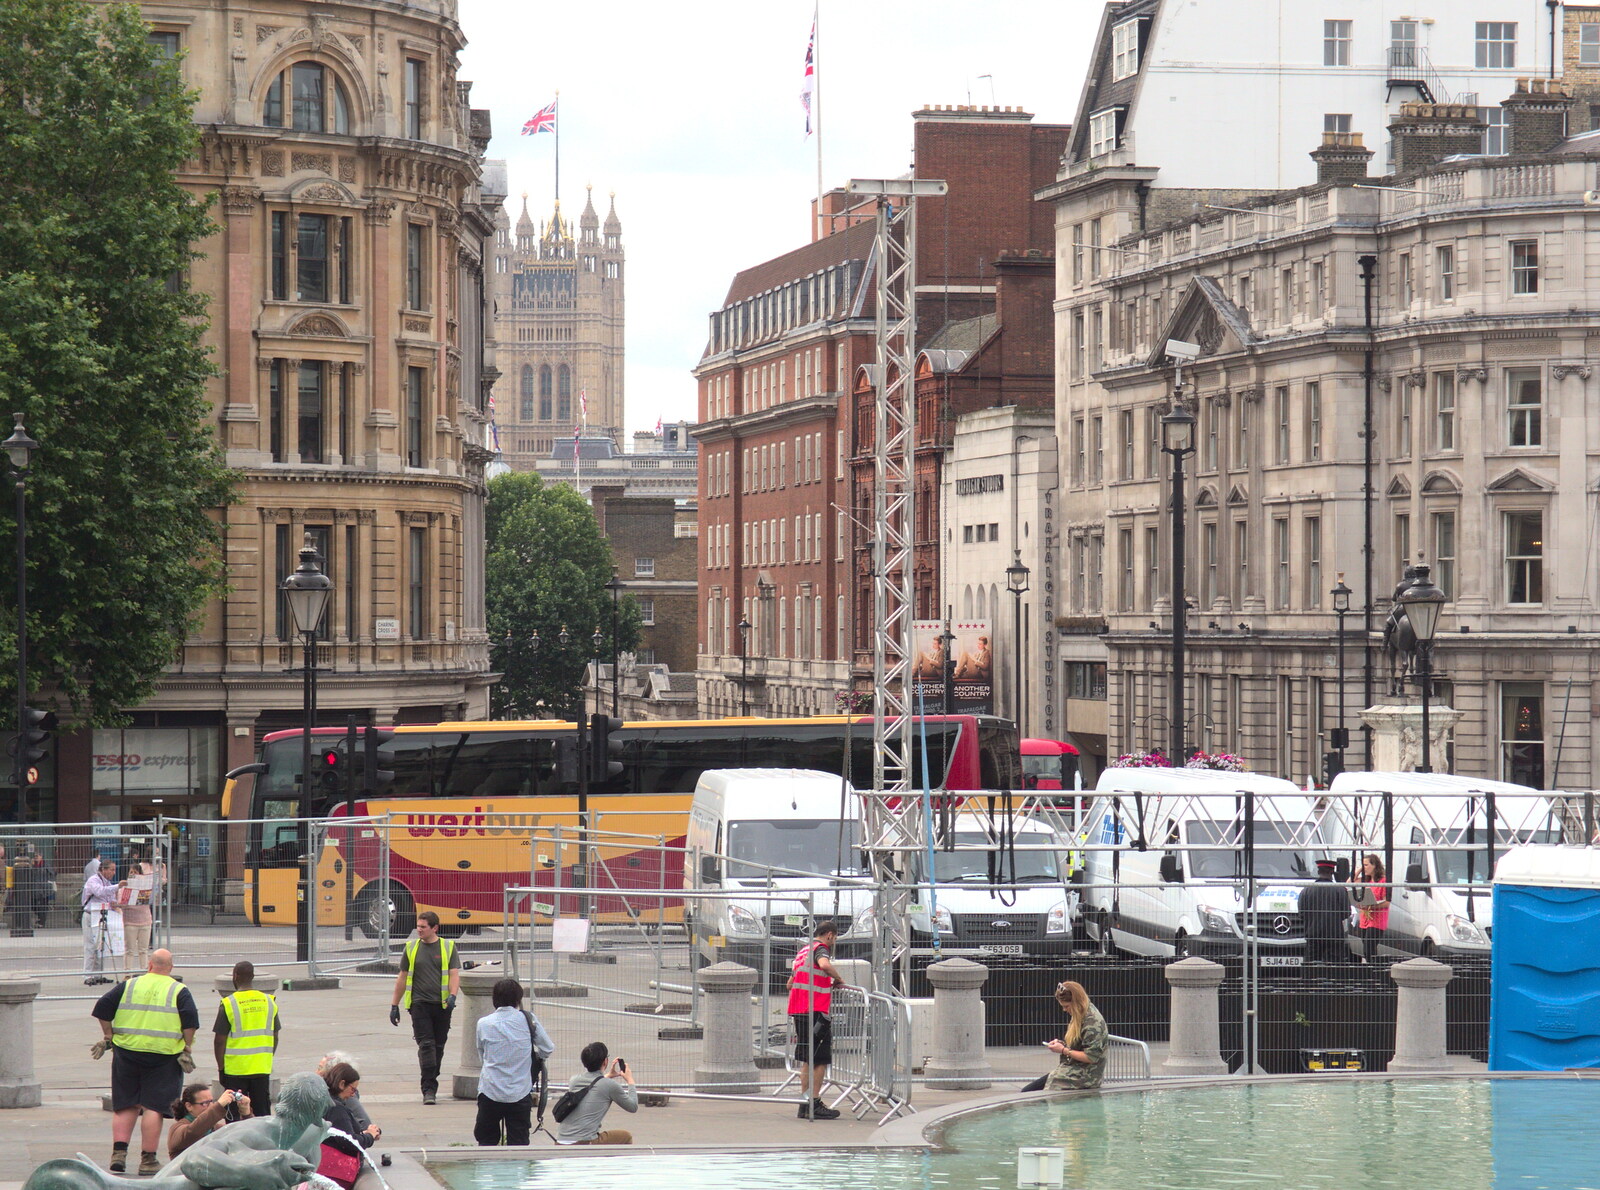 The view down Whitehall to the Elizabeth Tower from SwiftKey Innovation Days, The Haymarket, London - 27th June 2014